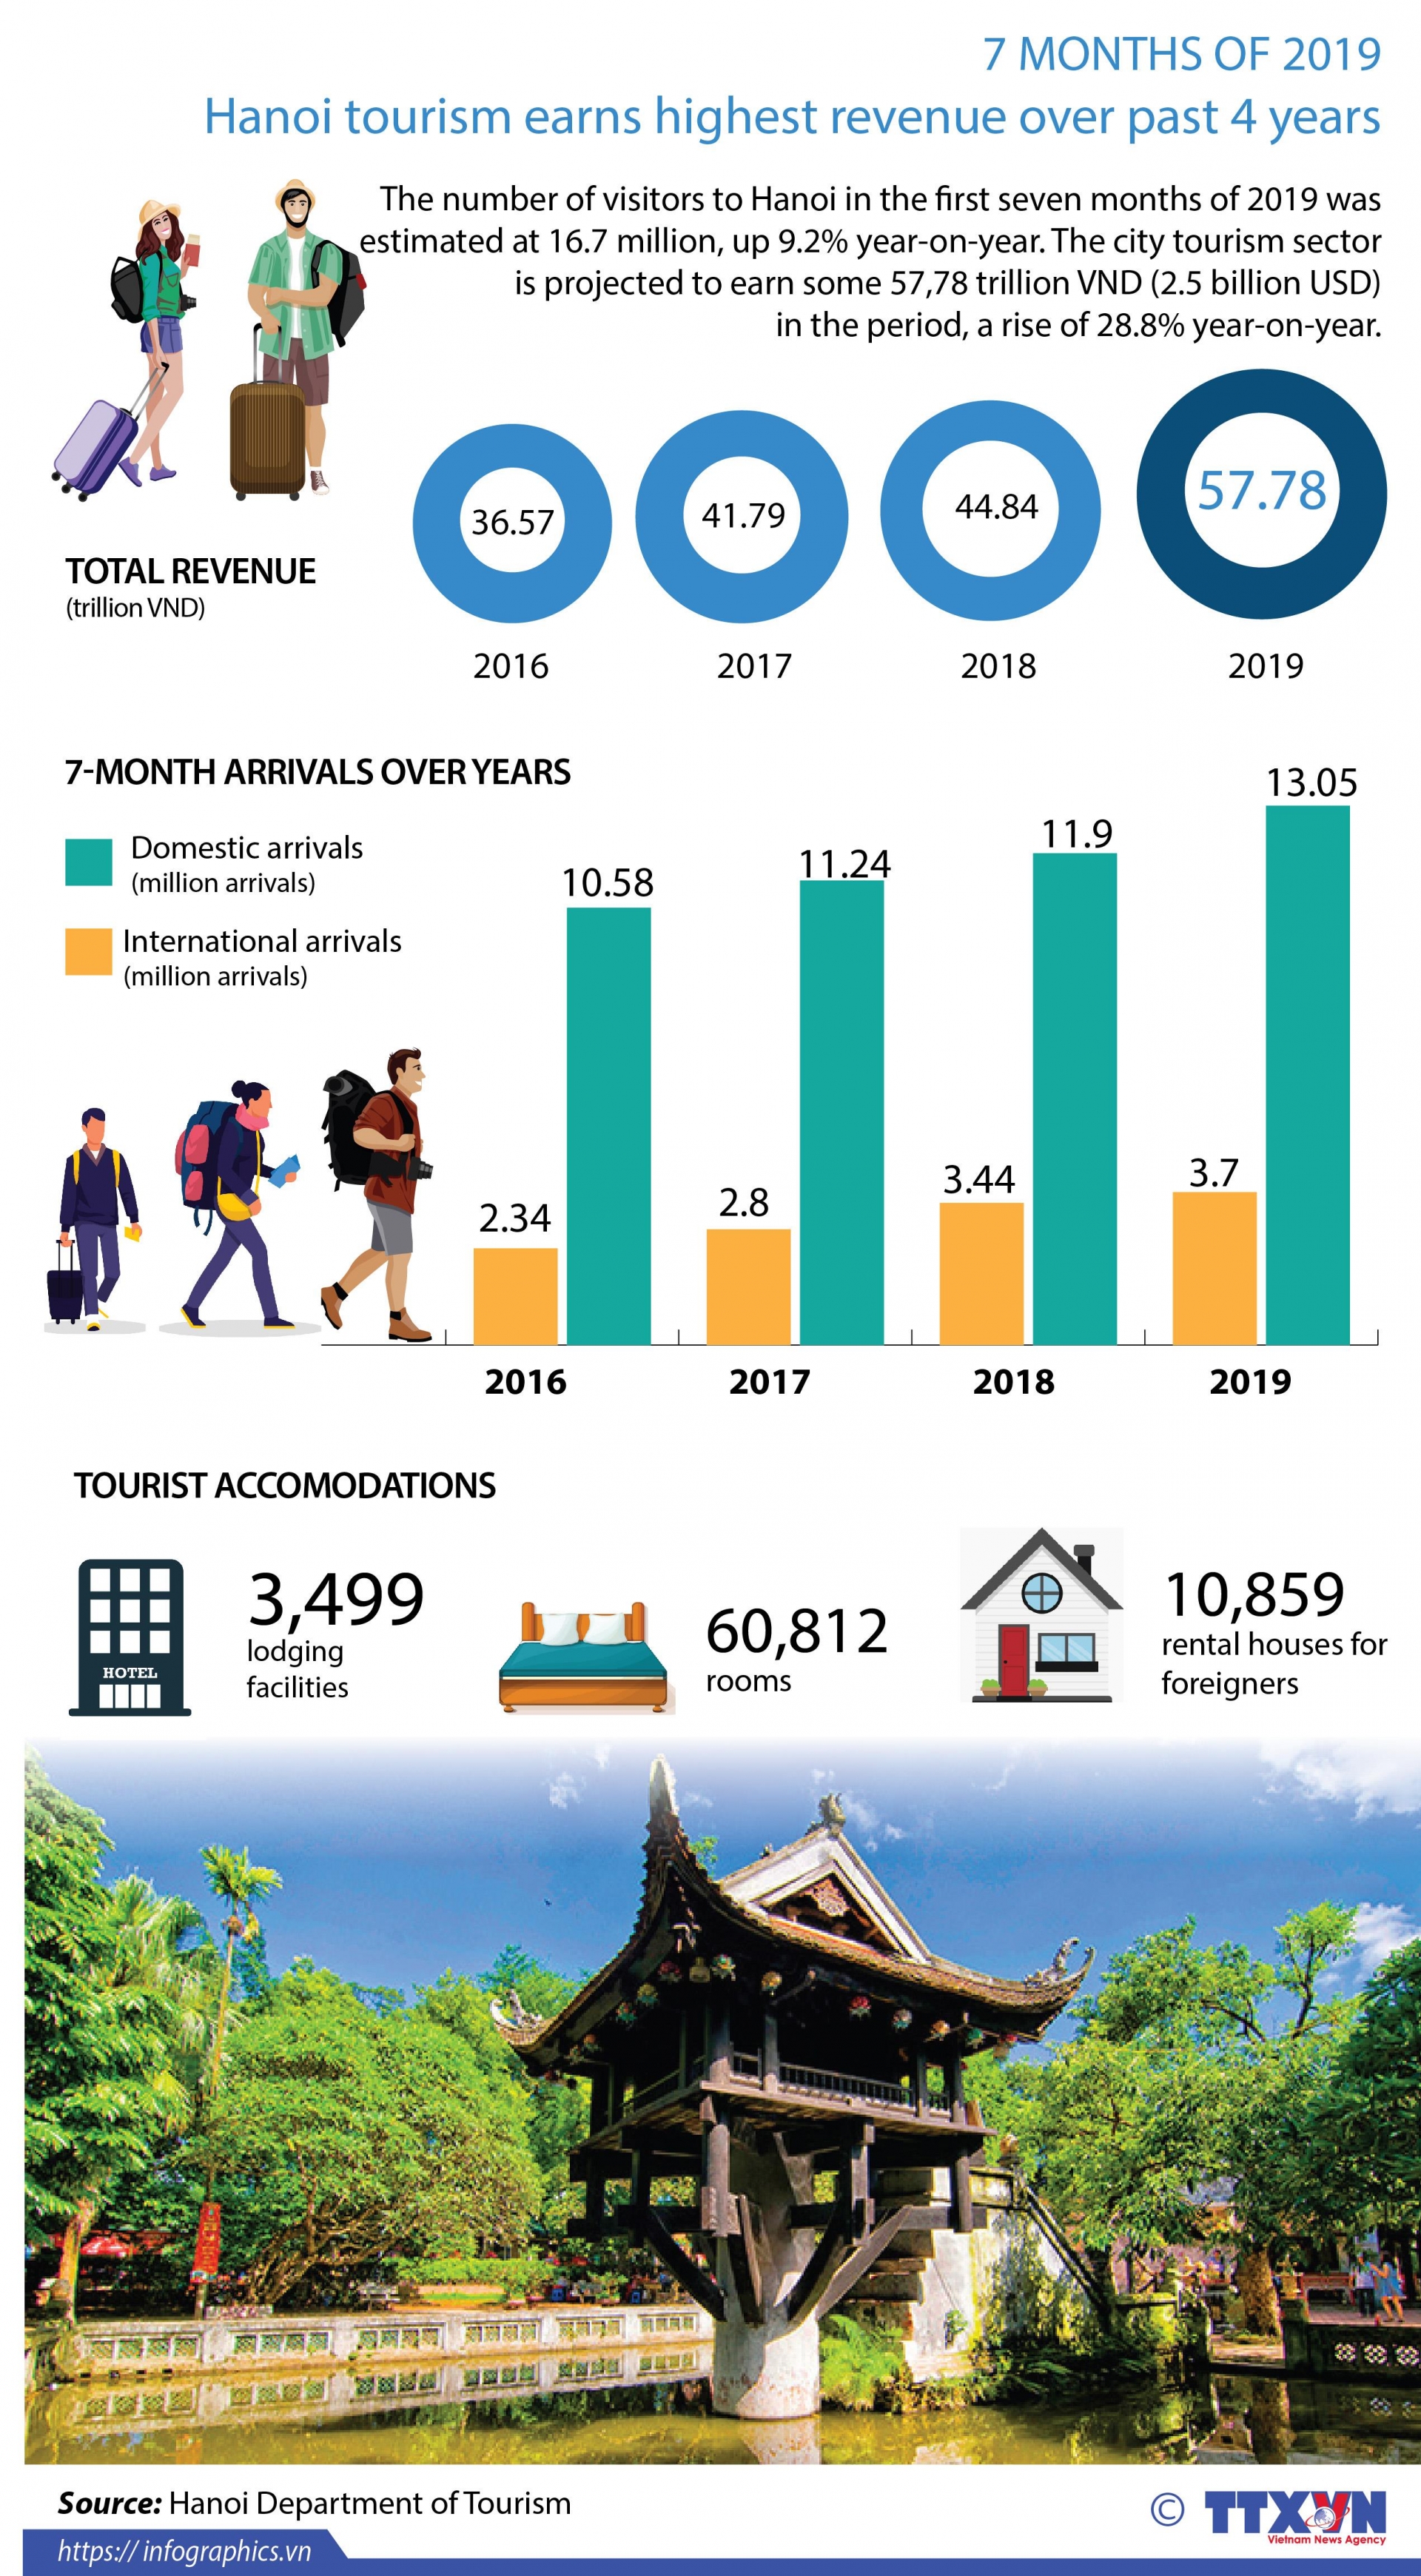 hanoi tourism earns highest revenue over past 4 years